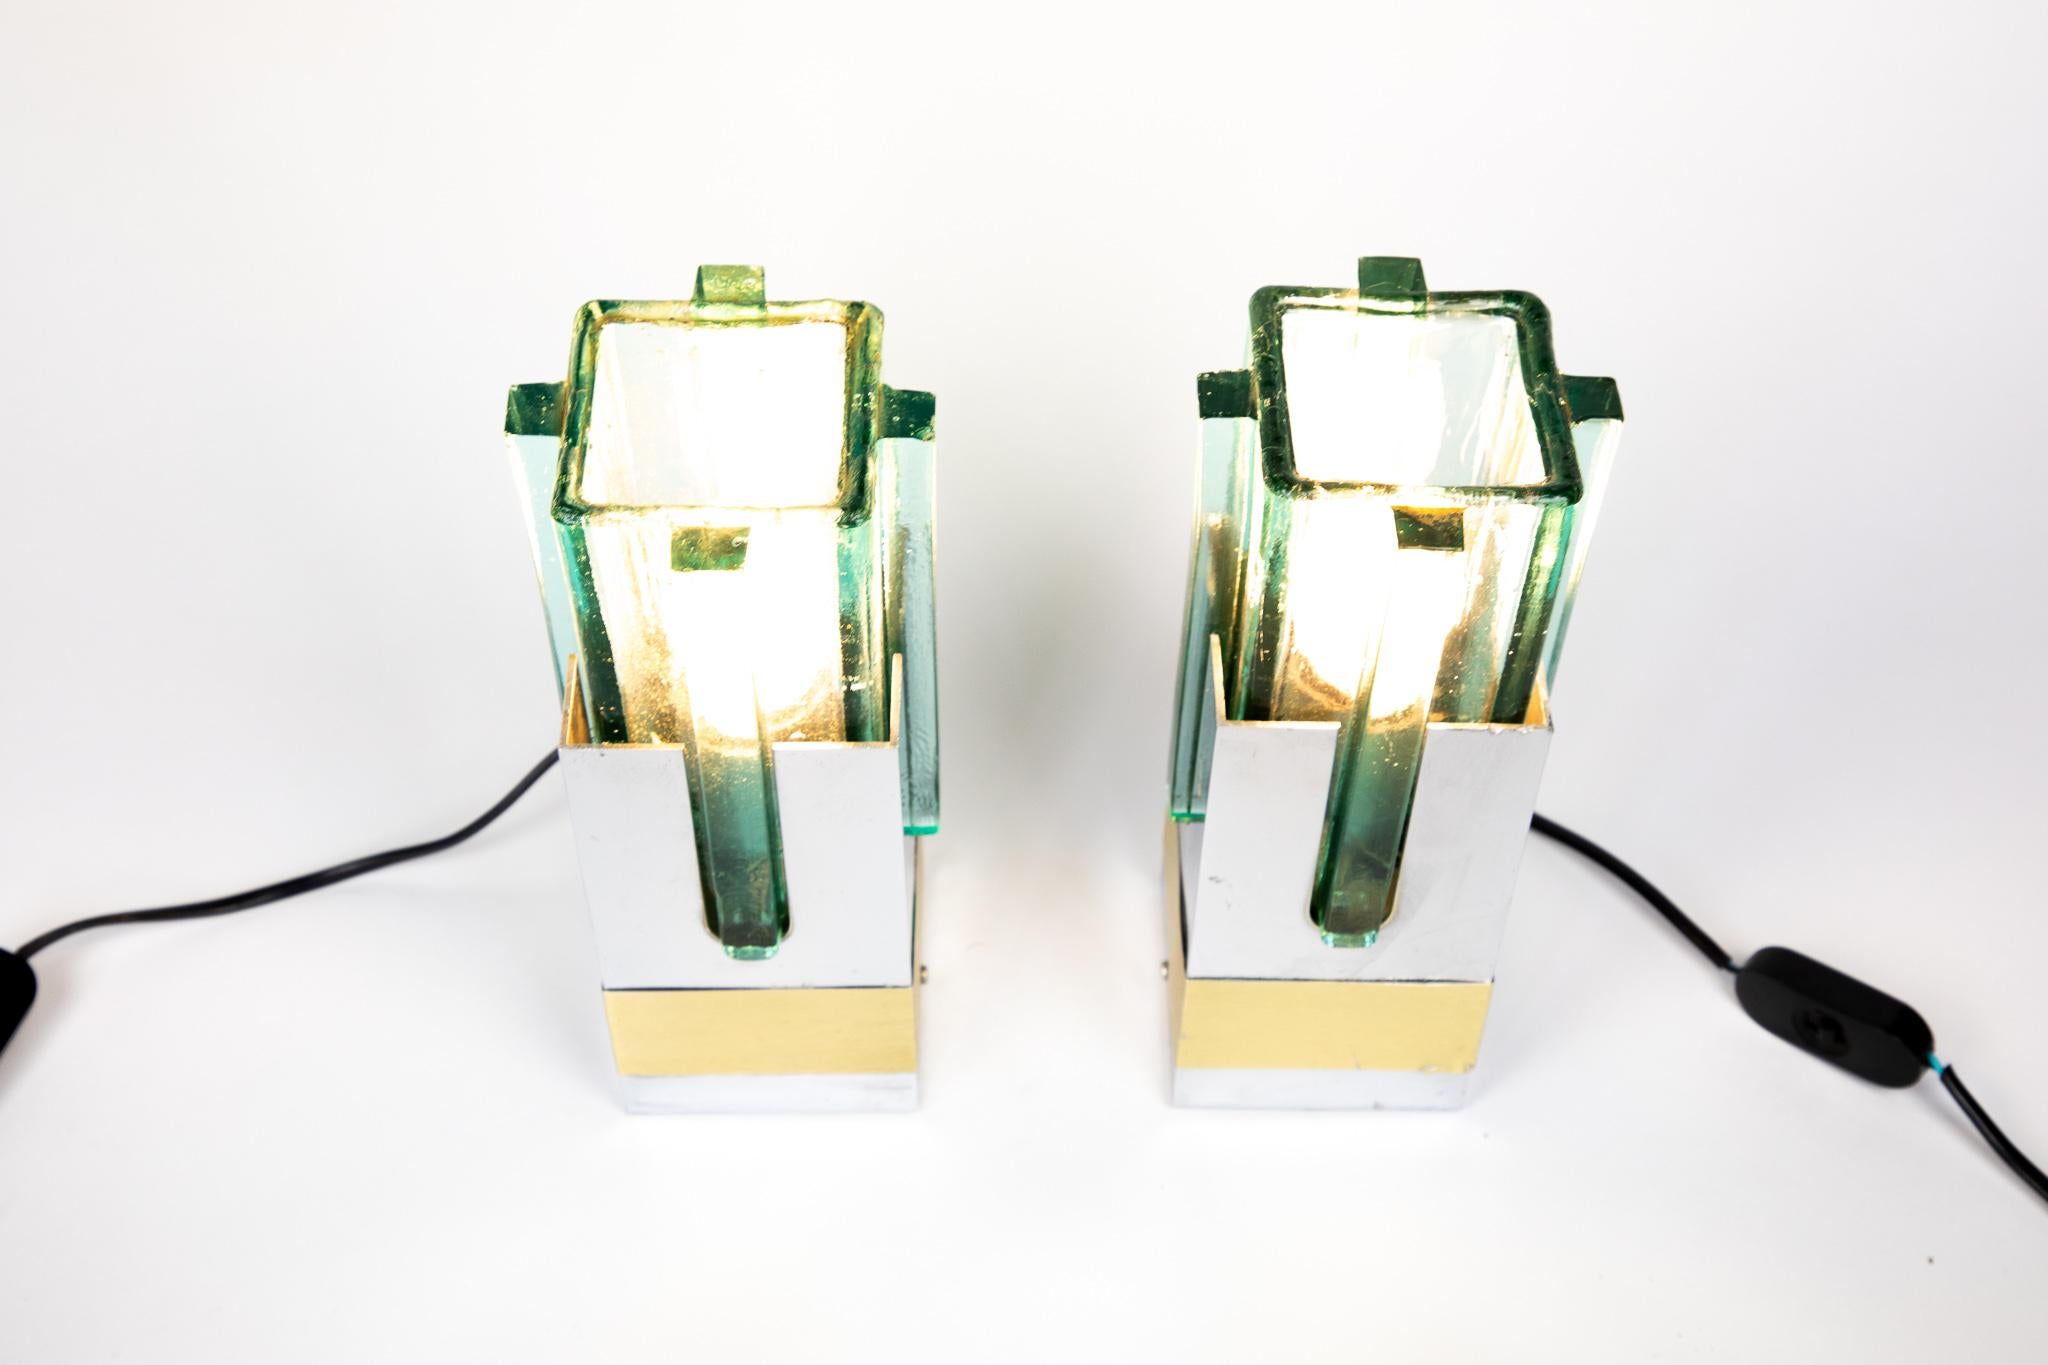 Polished Pair of  Table Lamps in Turquoise Glass, Brass and Chrome, Italy, 1970s For Sale